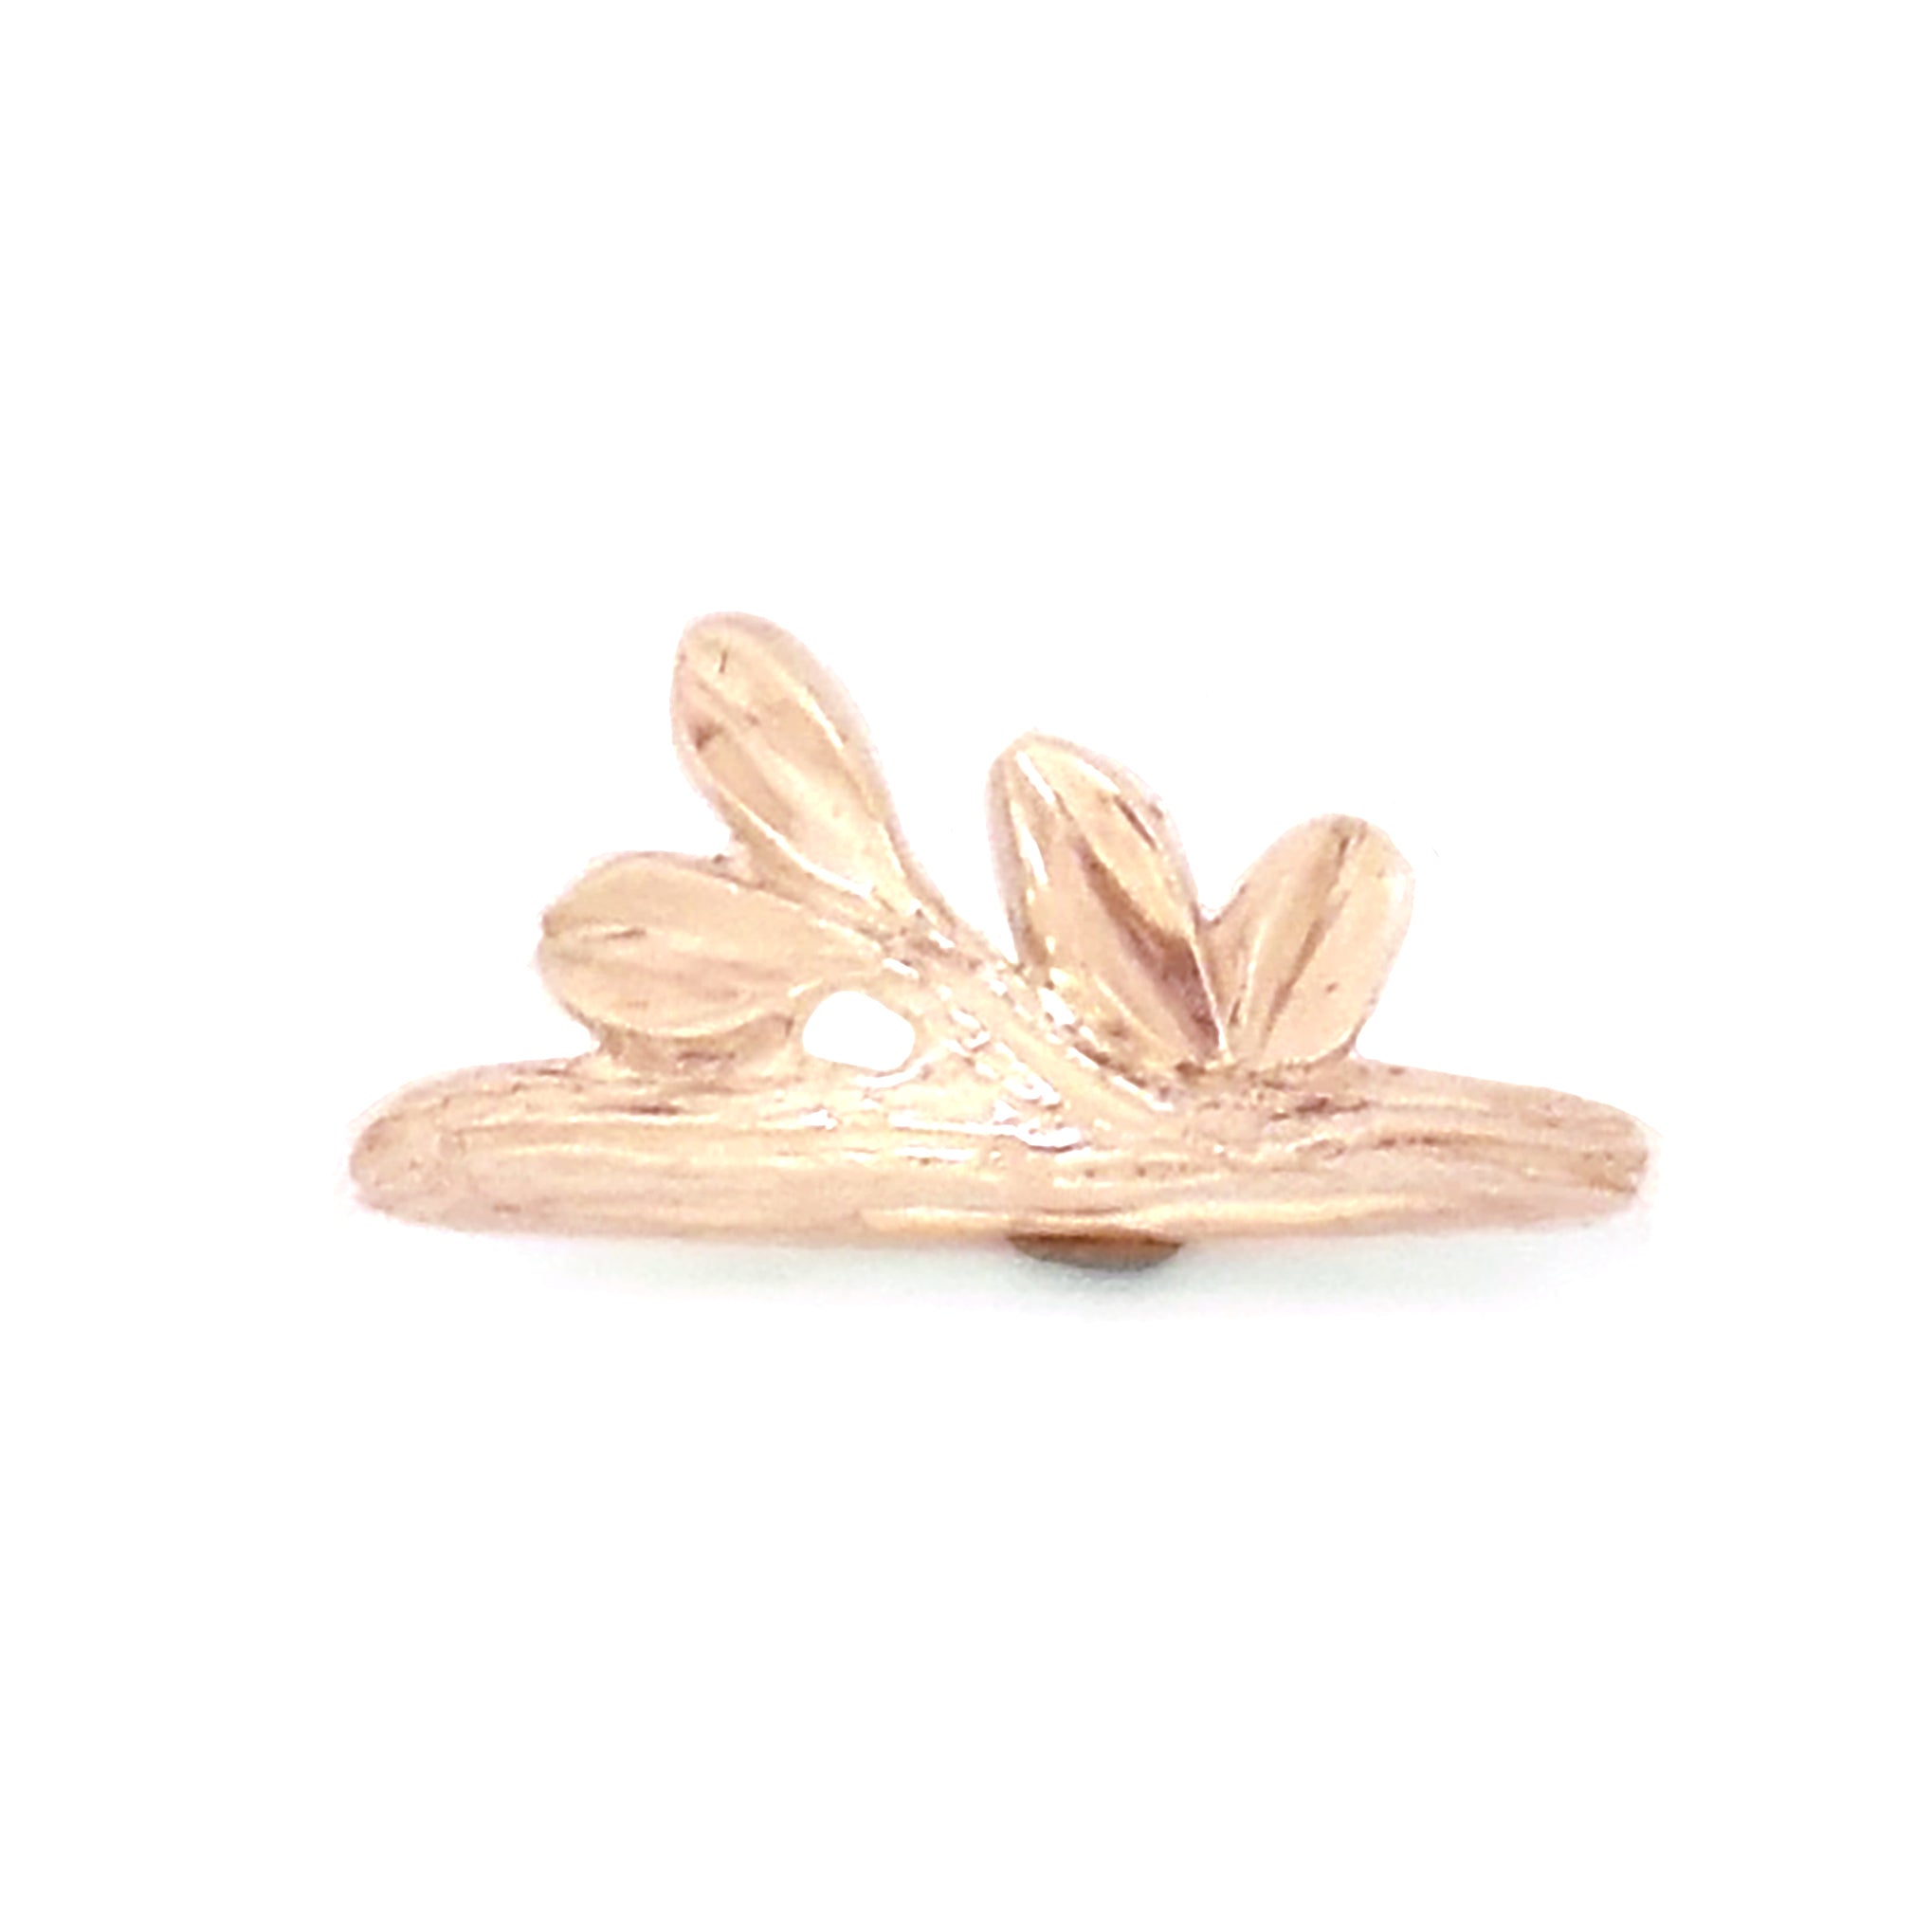 Gold Growing Love Twig Ring - your choice of gold - Wedding Ring 14K Rose Gold 14K Yellow Gold 6354 - handmade by Beth Millner Jewelry